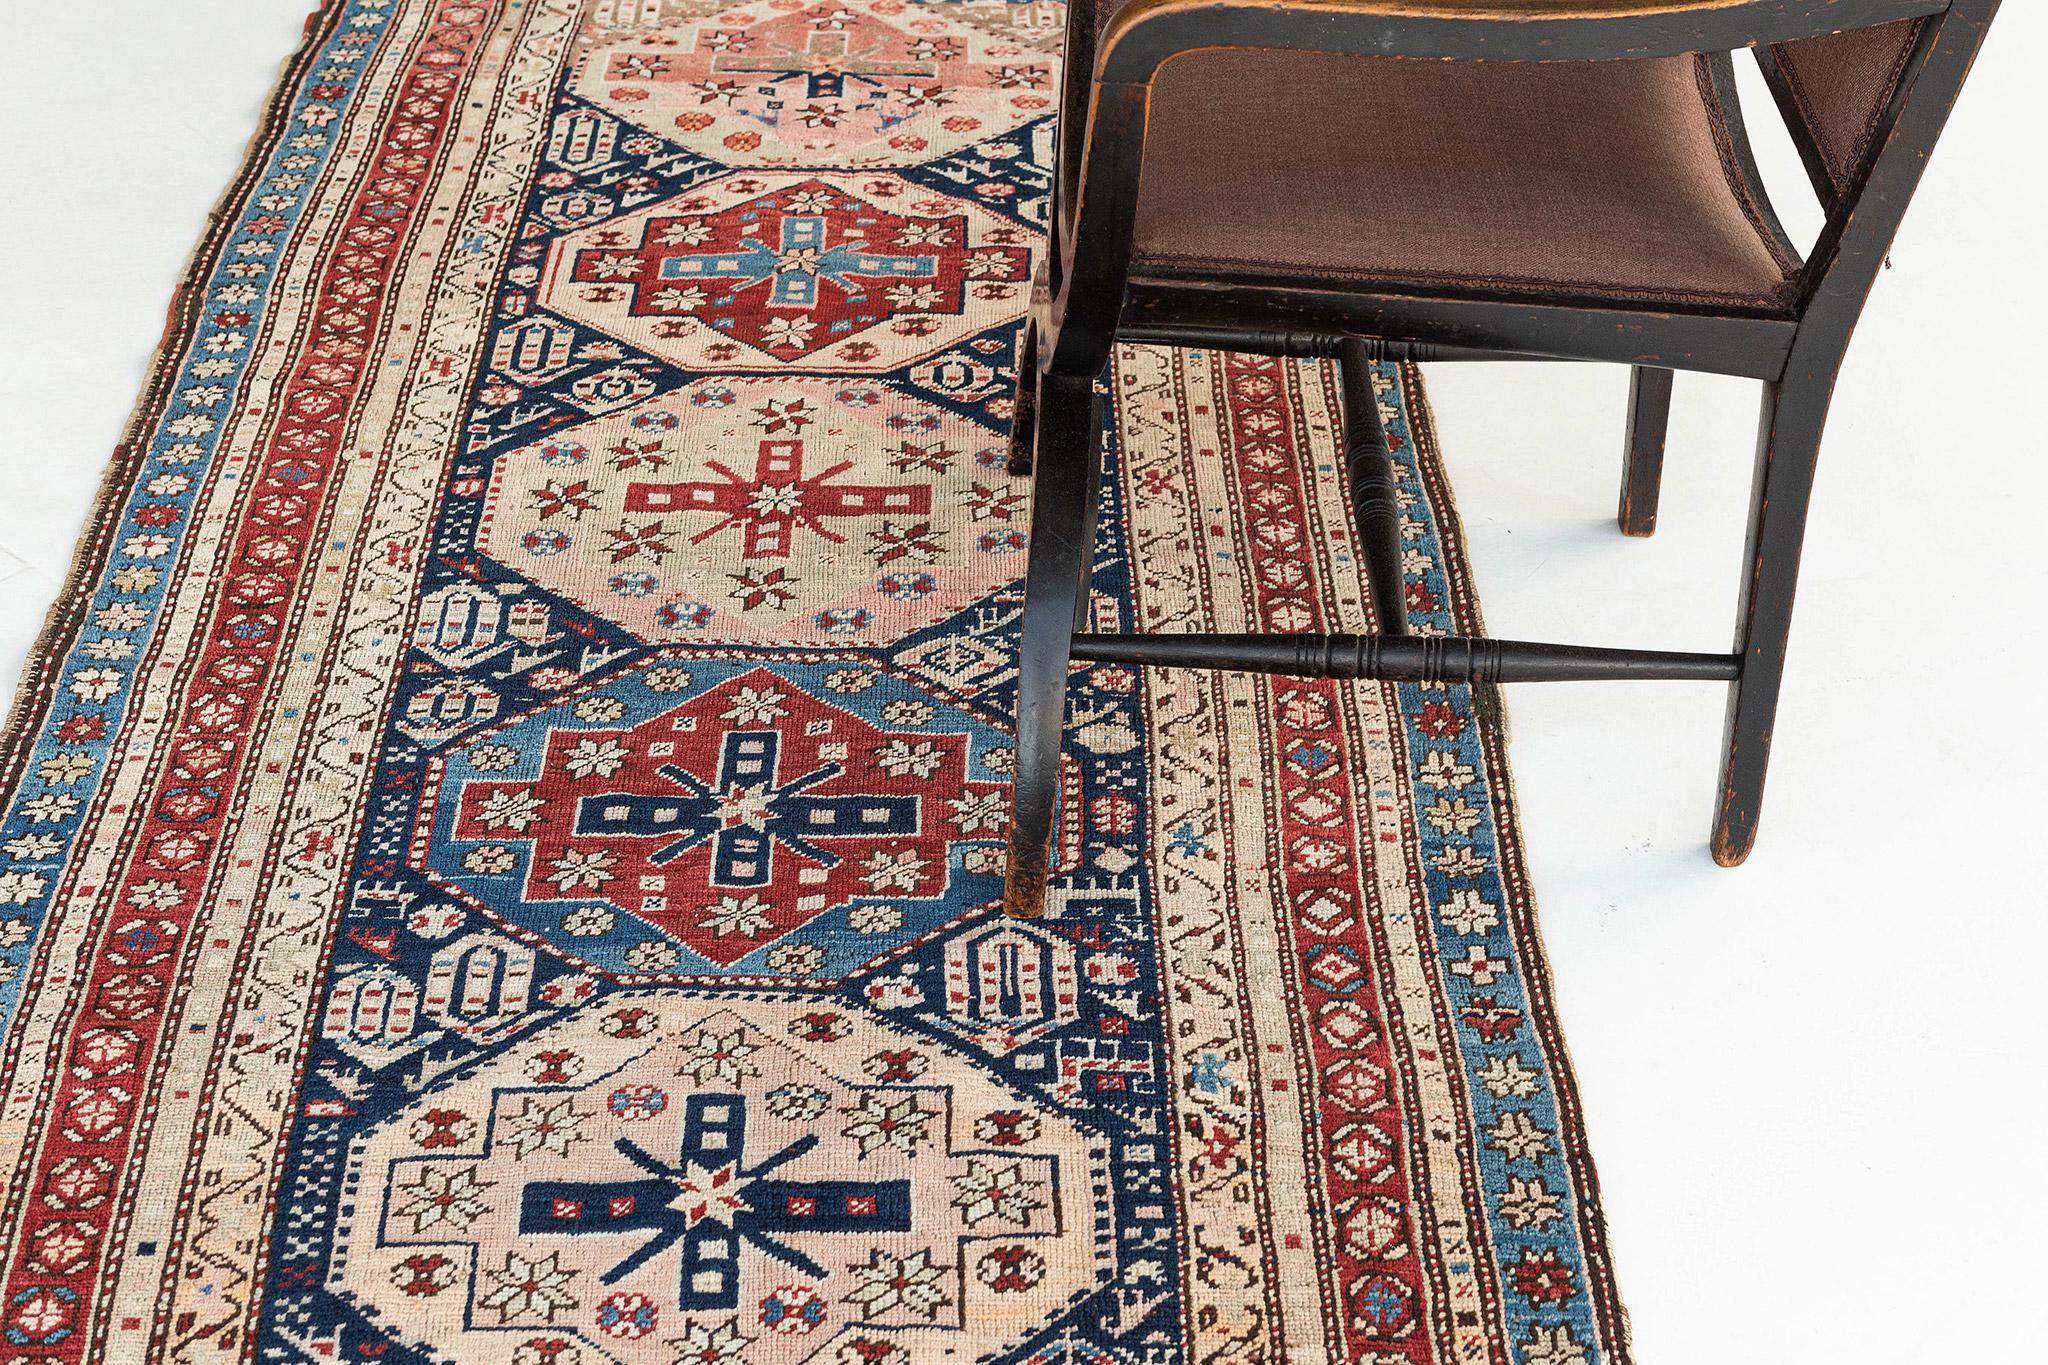 Behold and grab a glance at the charm of the Caucasian Kazak rug from our sought-after collection. Tones of midnight blue, maroon, and gold featured the alternates and outline details of Caucasian symbols. Furniture that having a boho-chic and